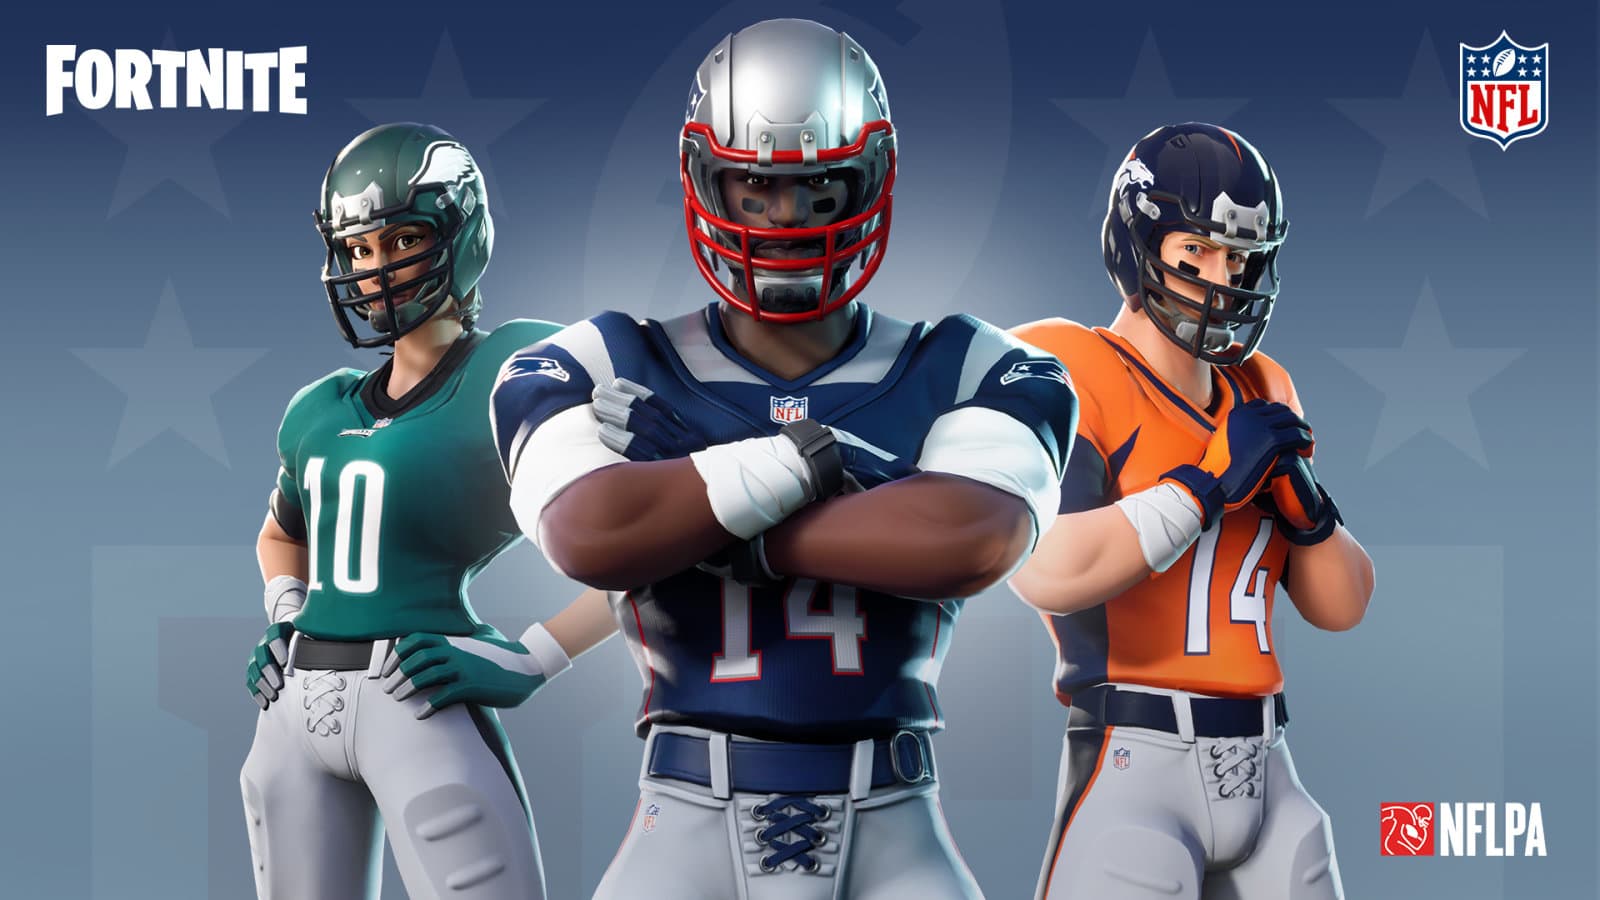 Fortnite is getting real NFL jerseys and new emotes